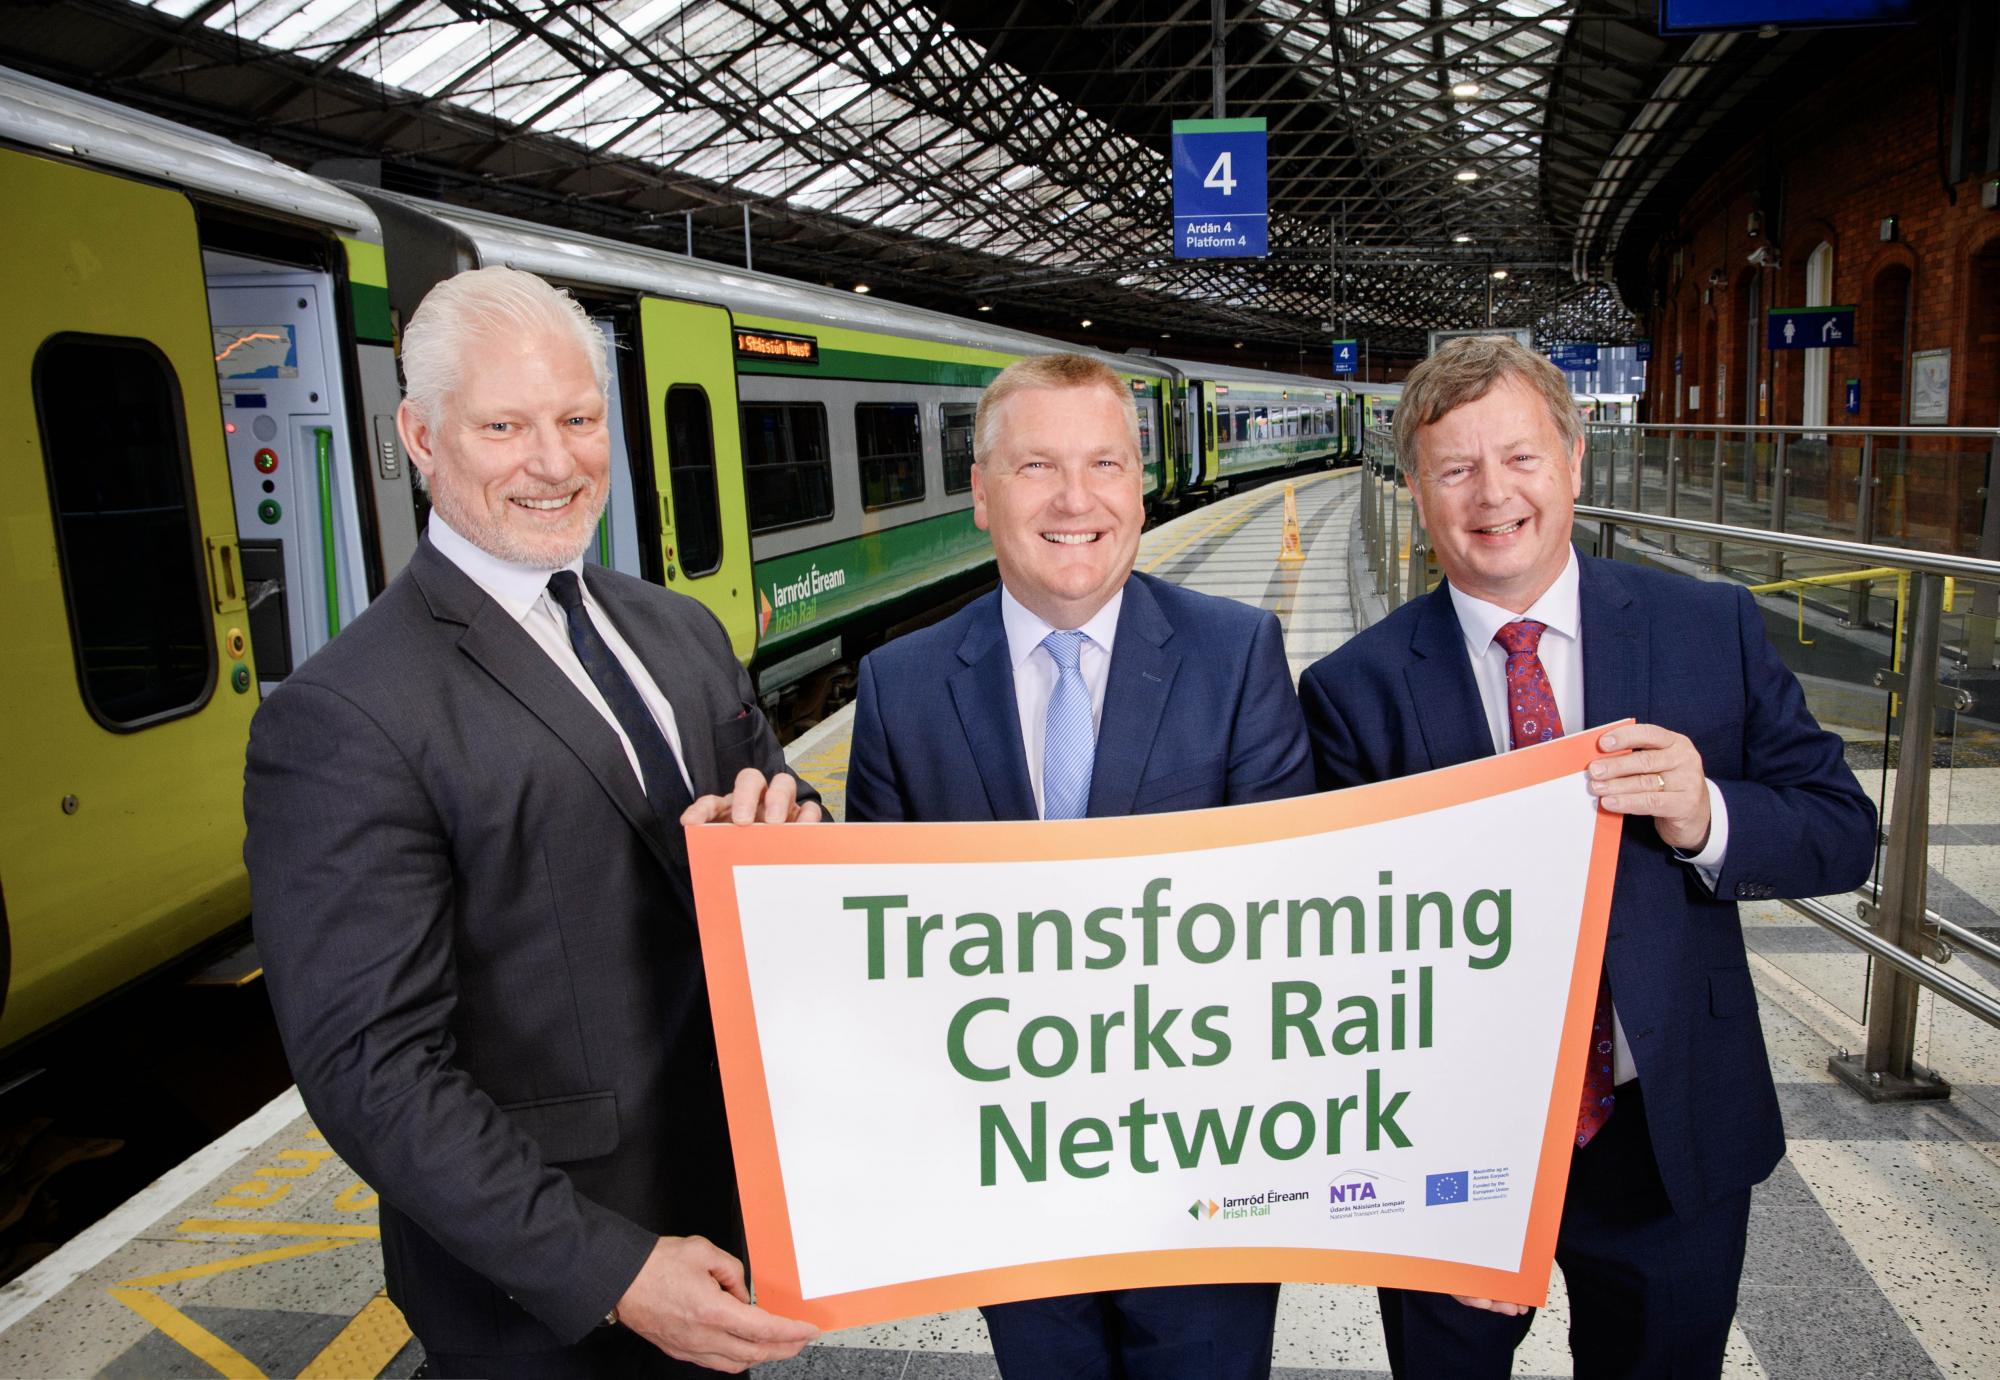 Alstom to install ETCS and signalling technology on parts of Irish rail network